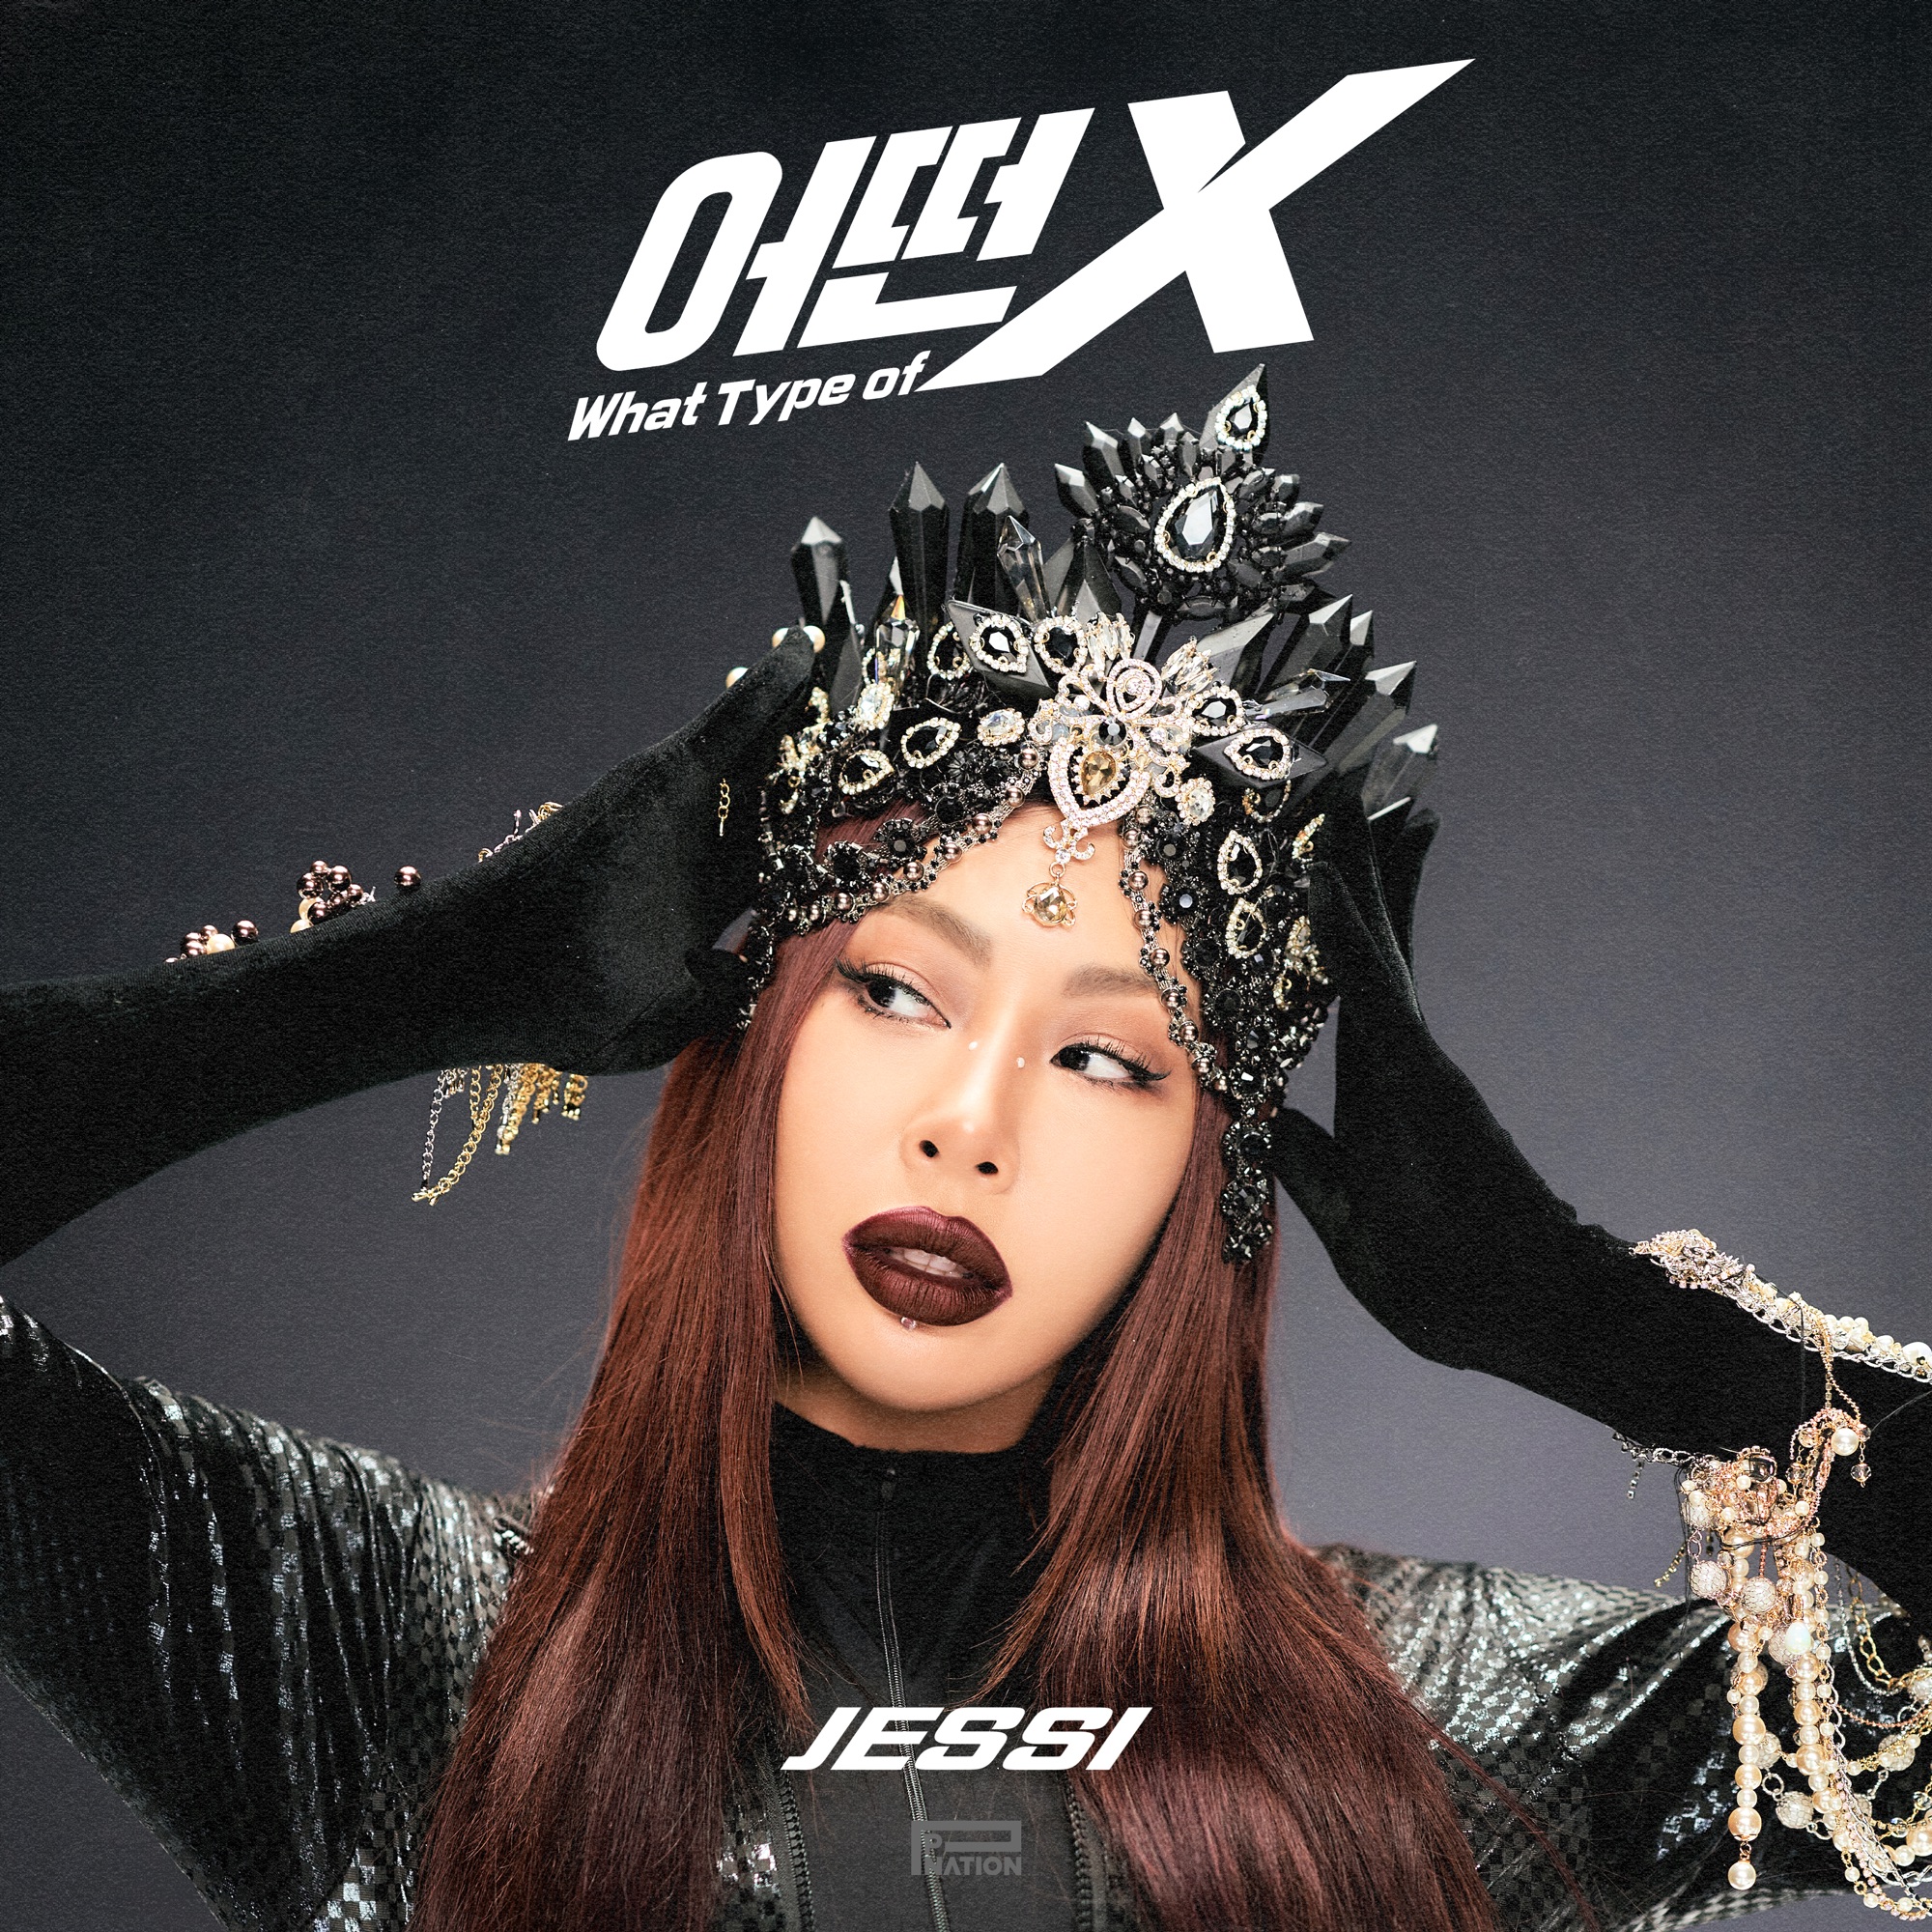 [Single] JESSI - What Type of X (iTunes Plus AAC M4A)